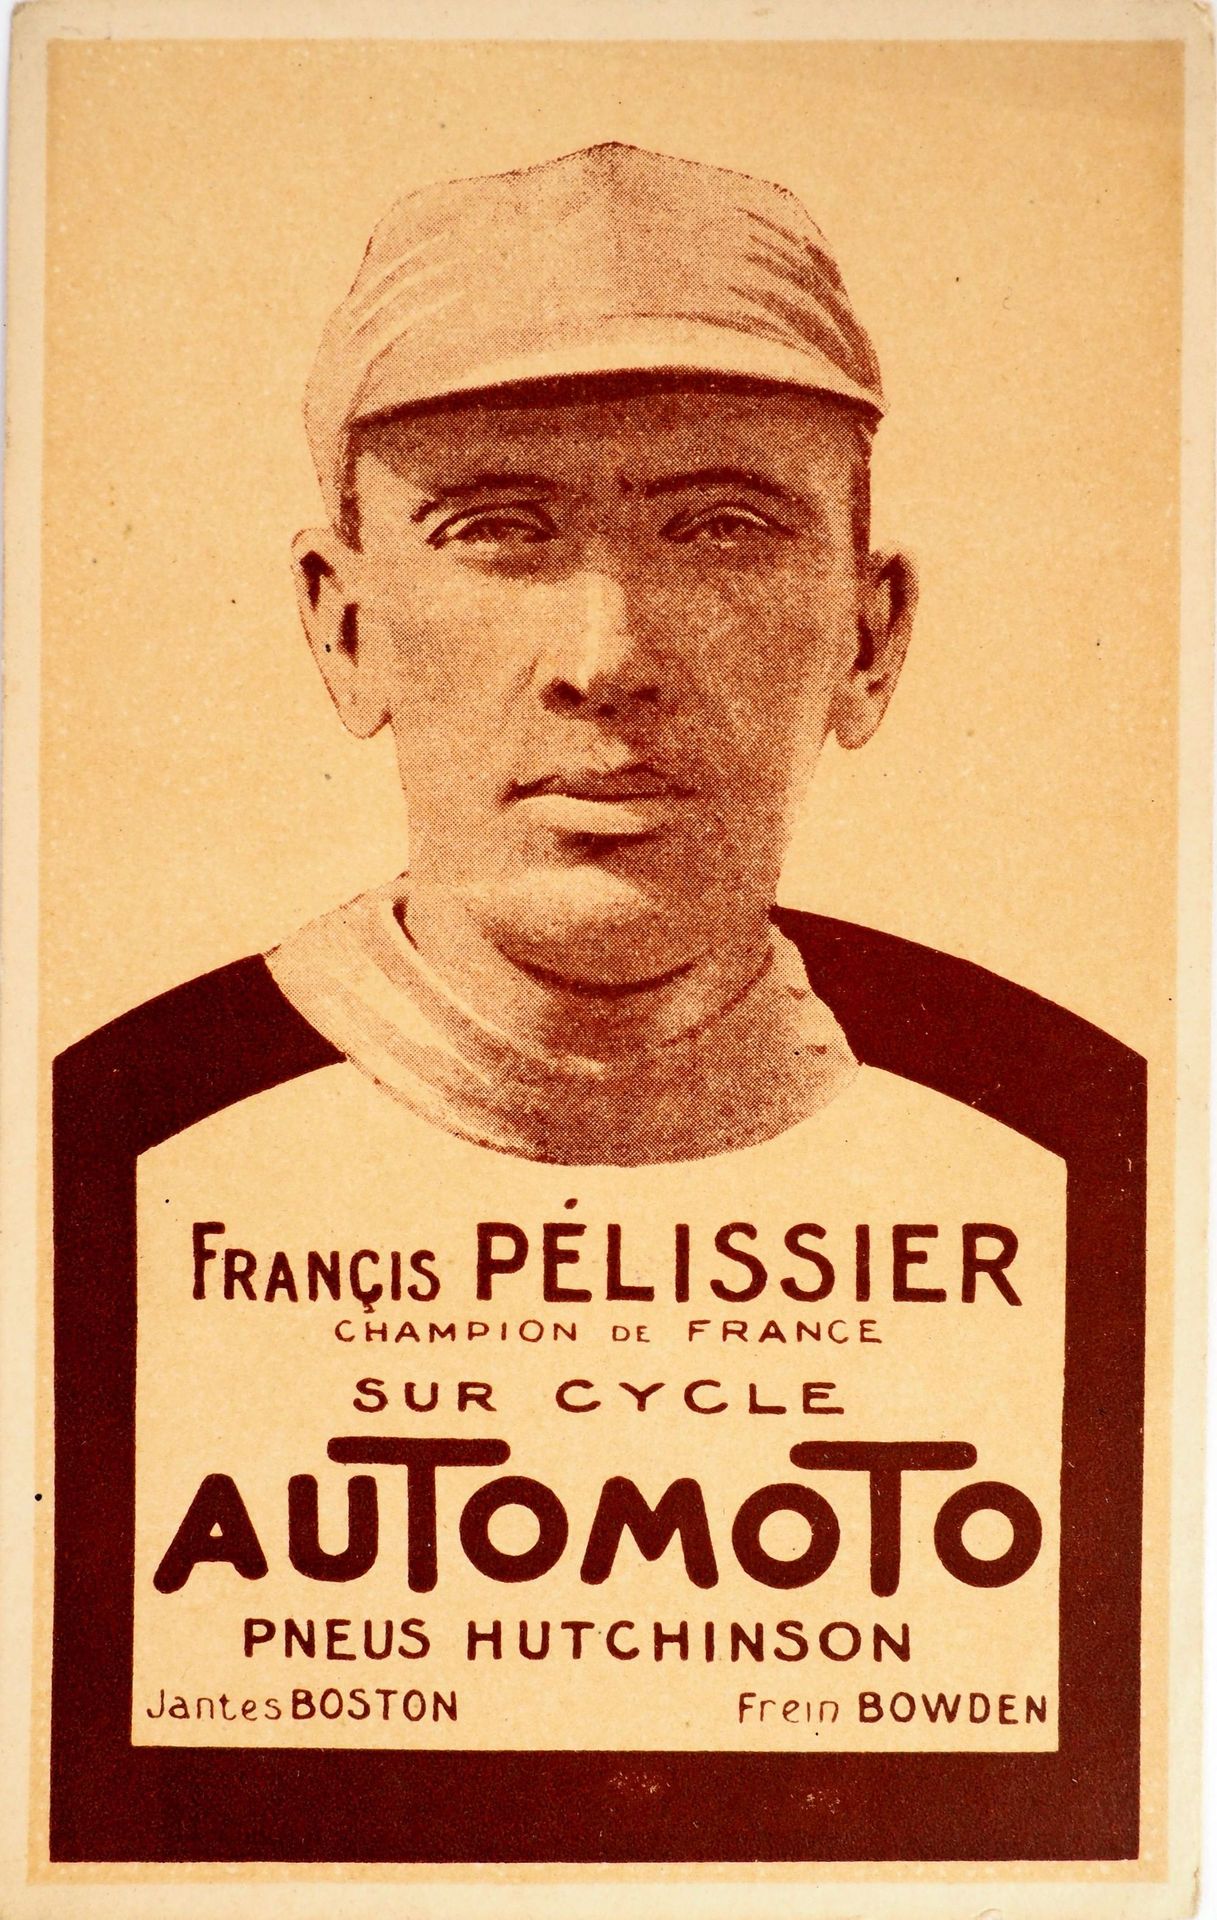 Null Cycling/F.Pélissier/Automoto. New postcard of the "great" Francis Pélissier&hellip;